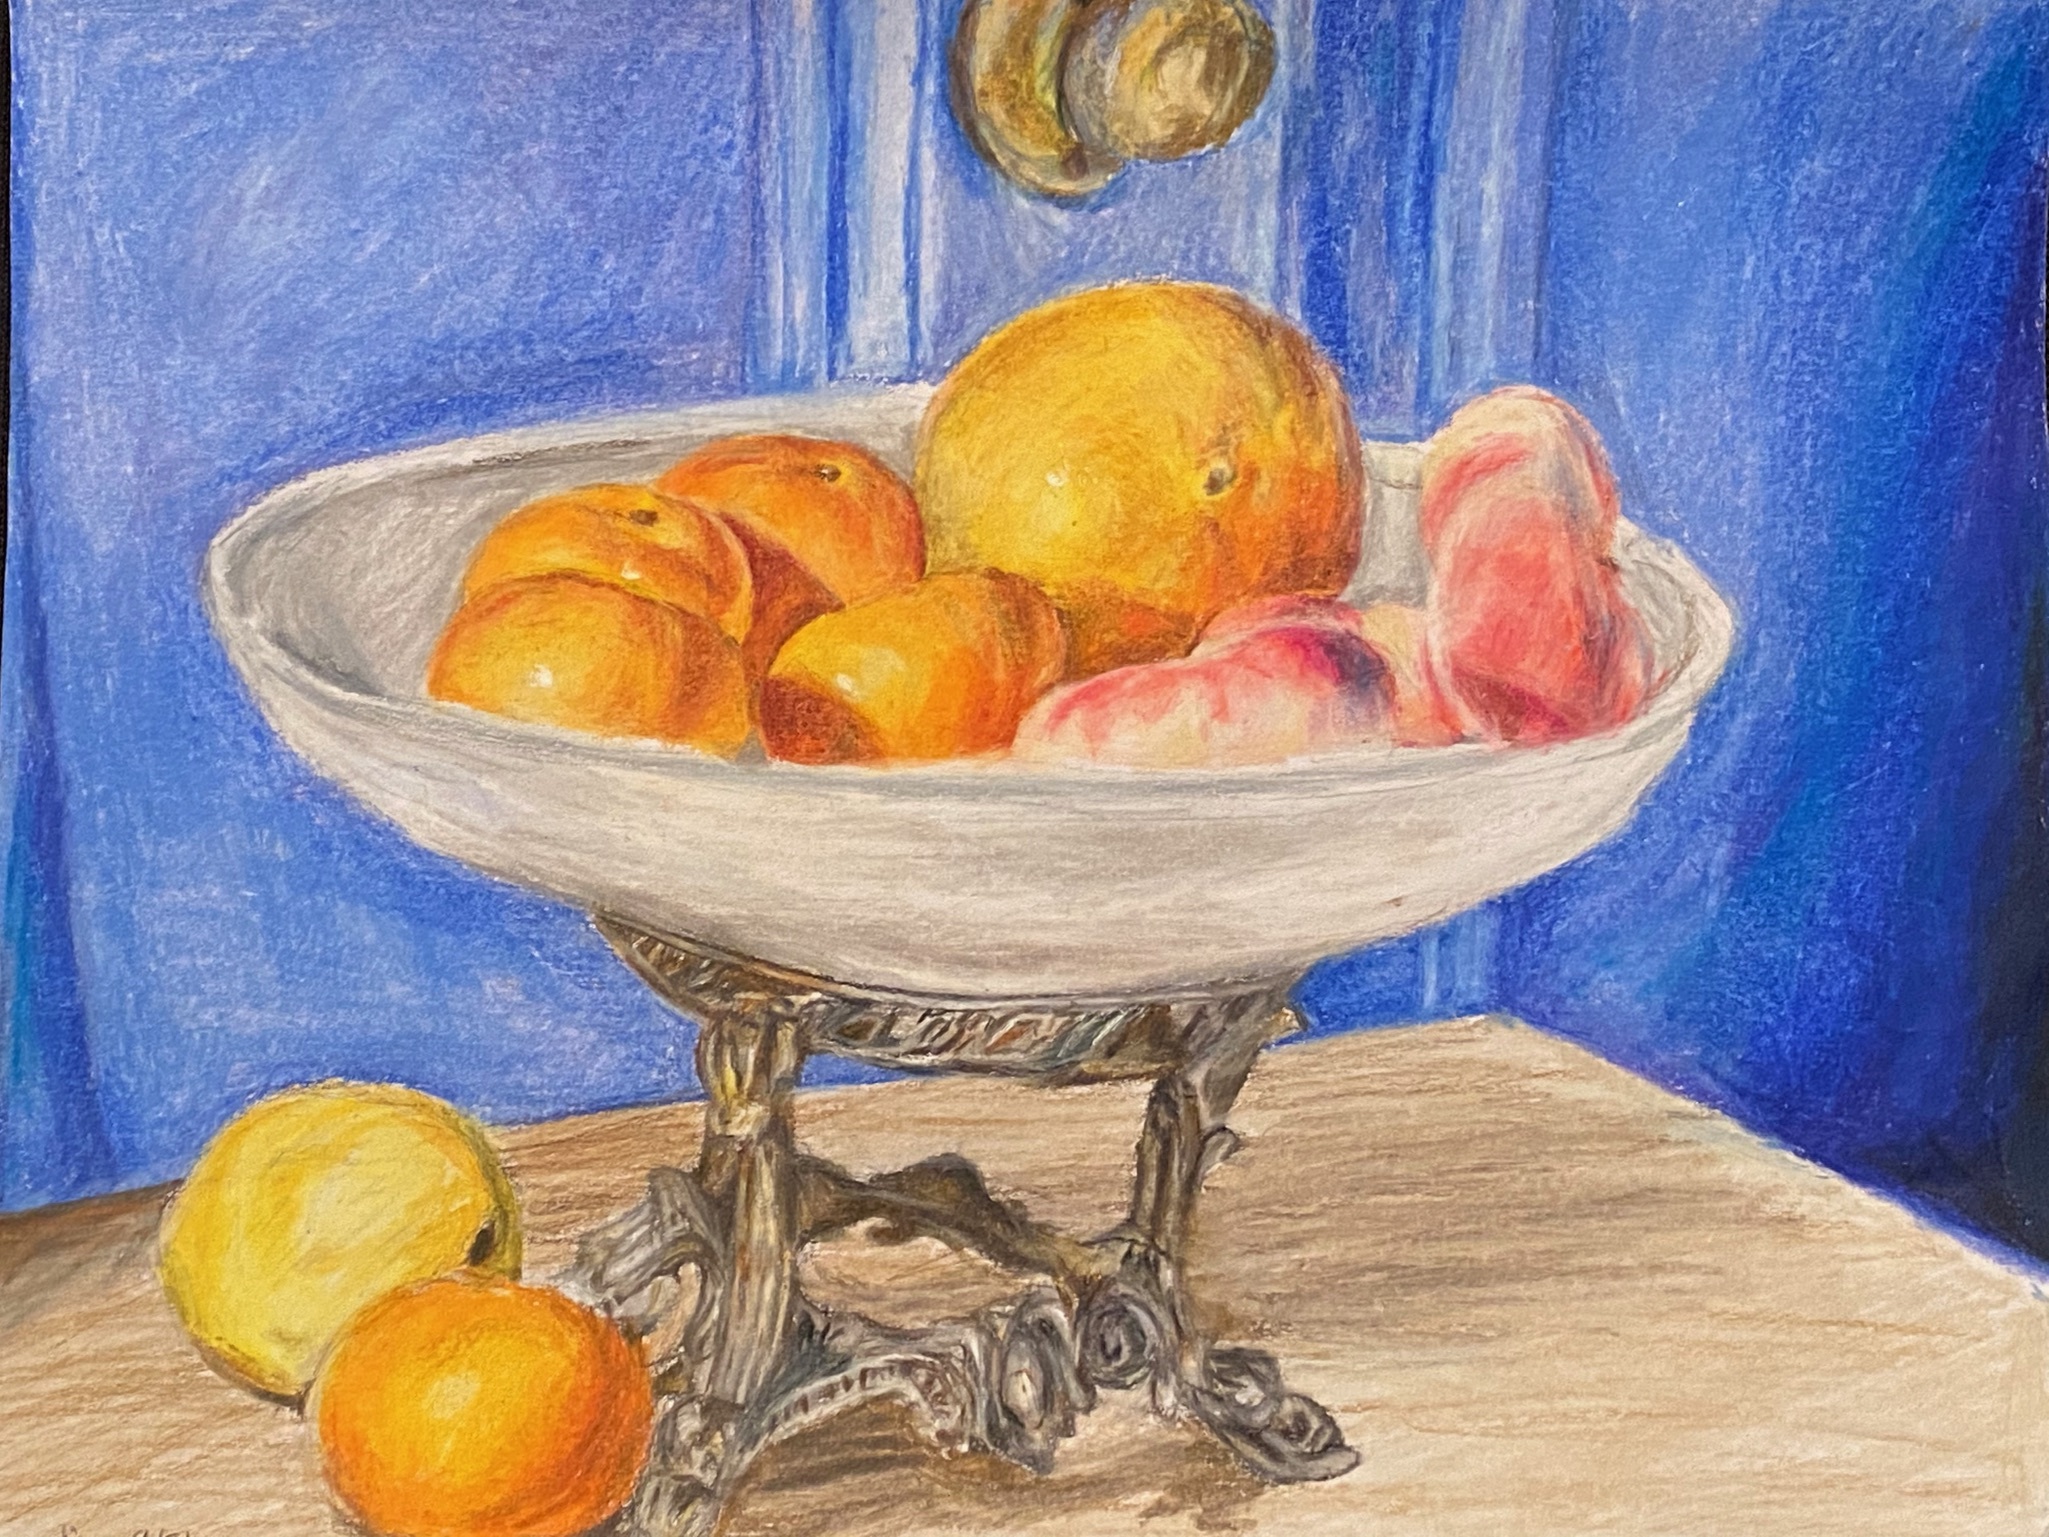 View Image Details Still Life in colored pencil by Caroline